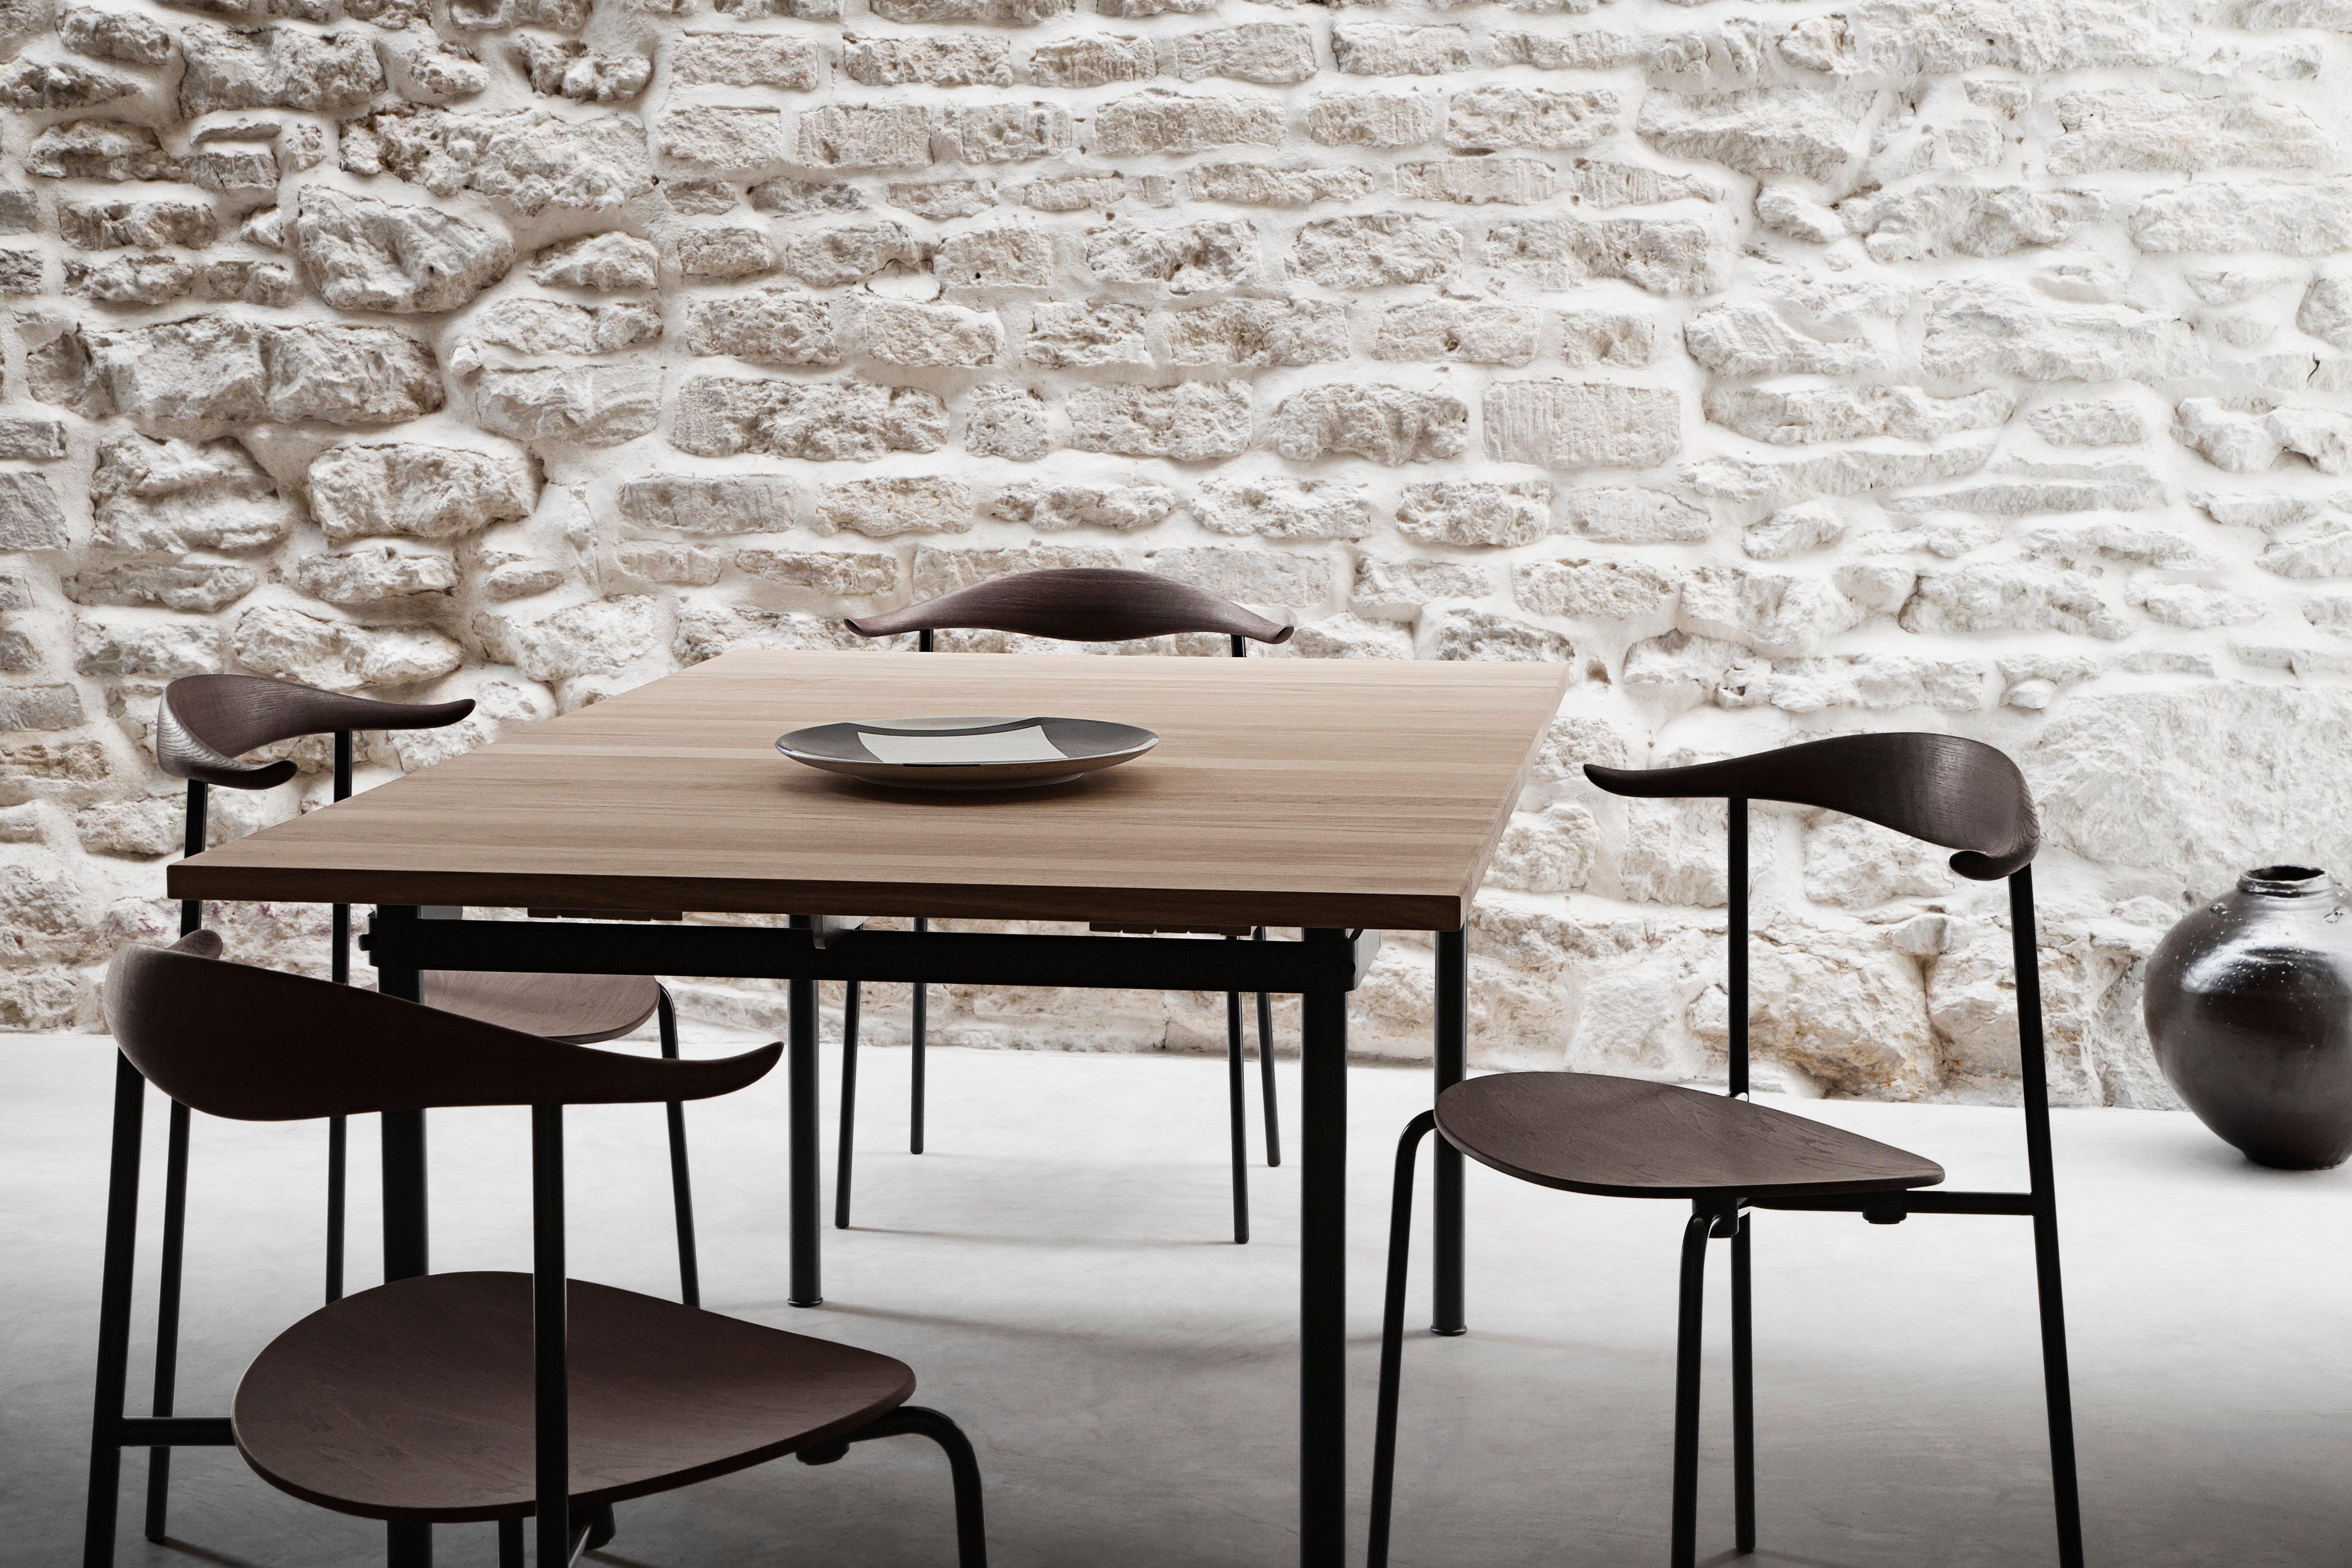 Powder-Coated CH88T Dining Chair in Oak Smoked Stain & Black Steel Base by Hans J. Wegner